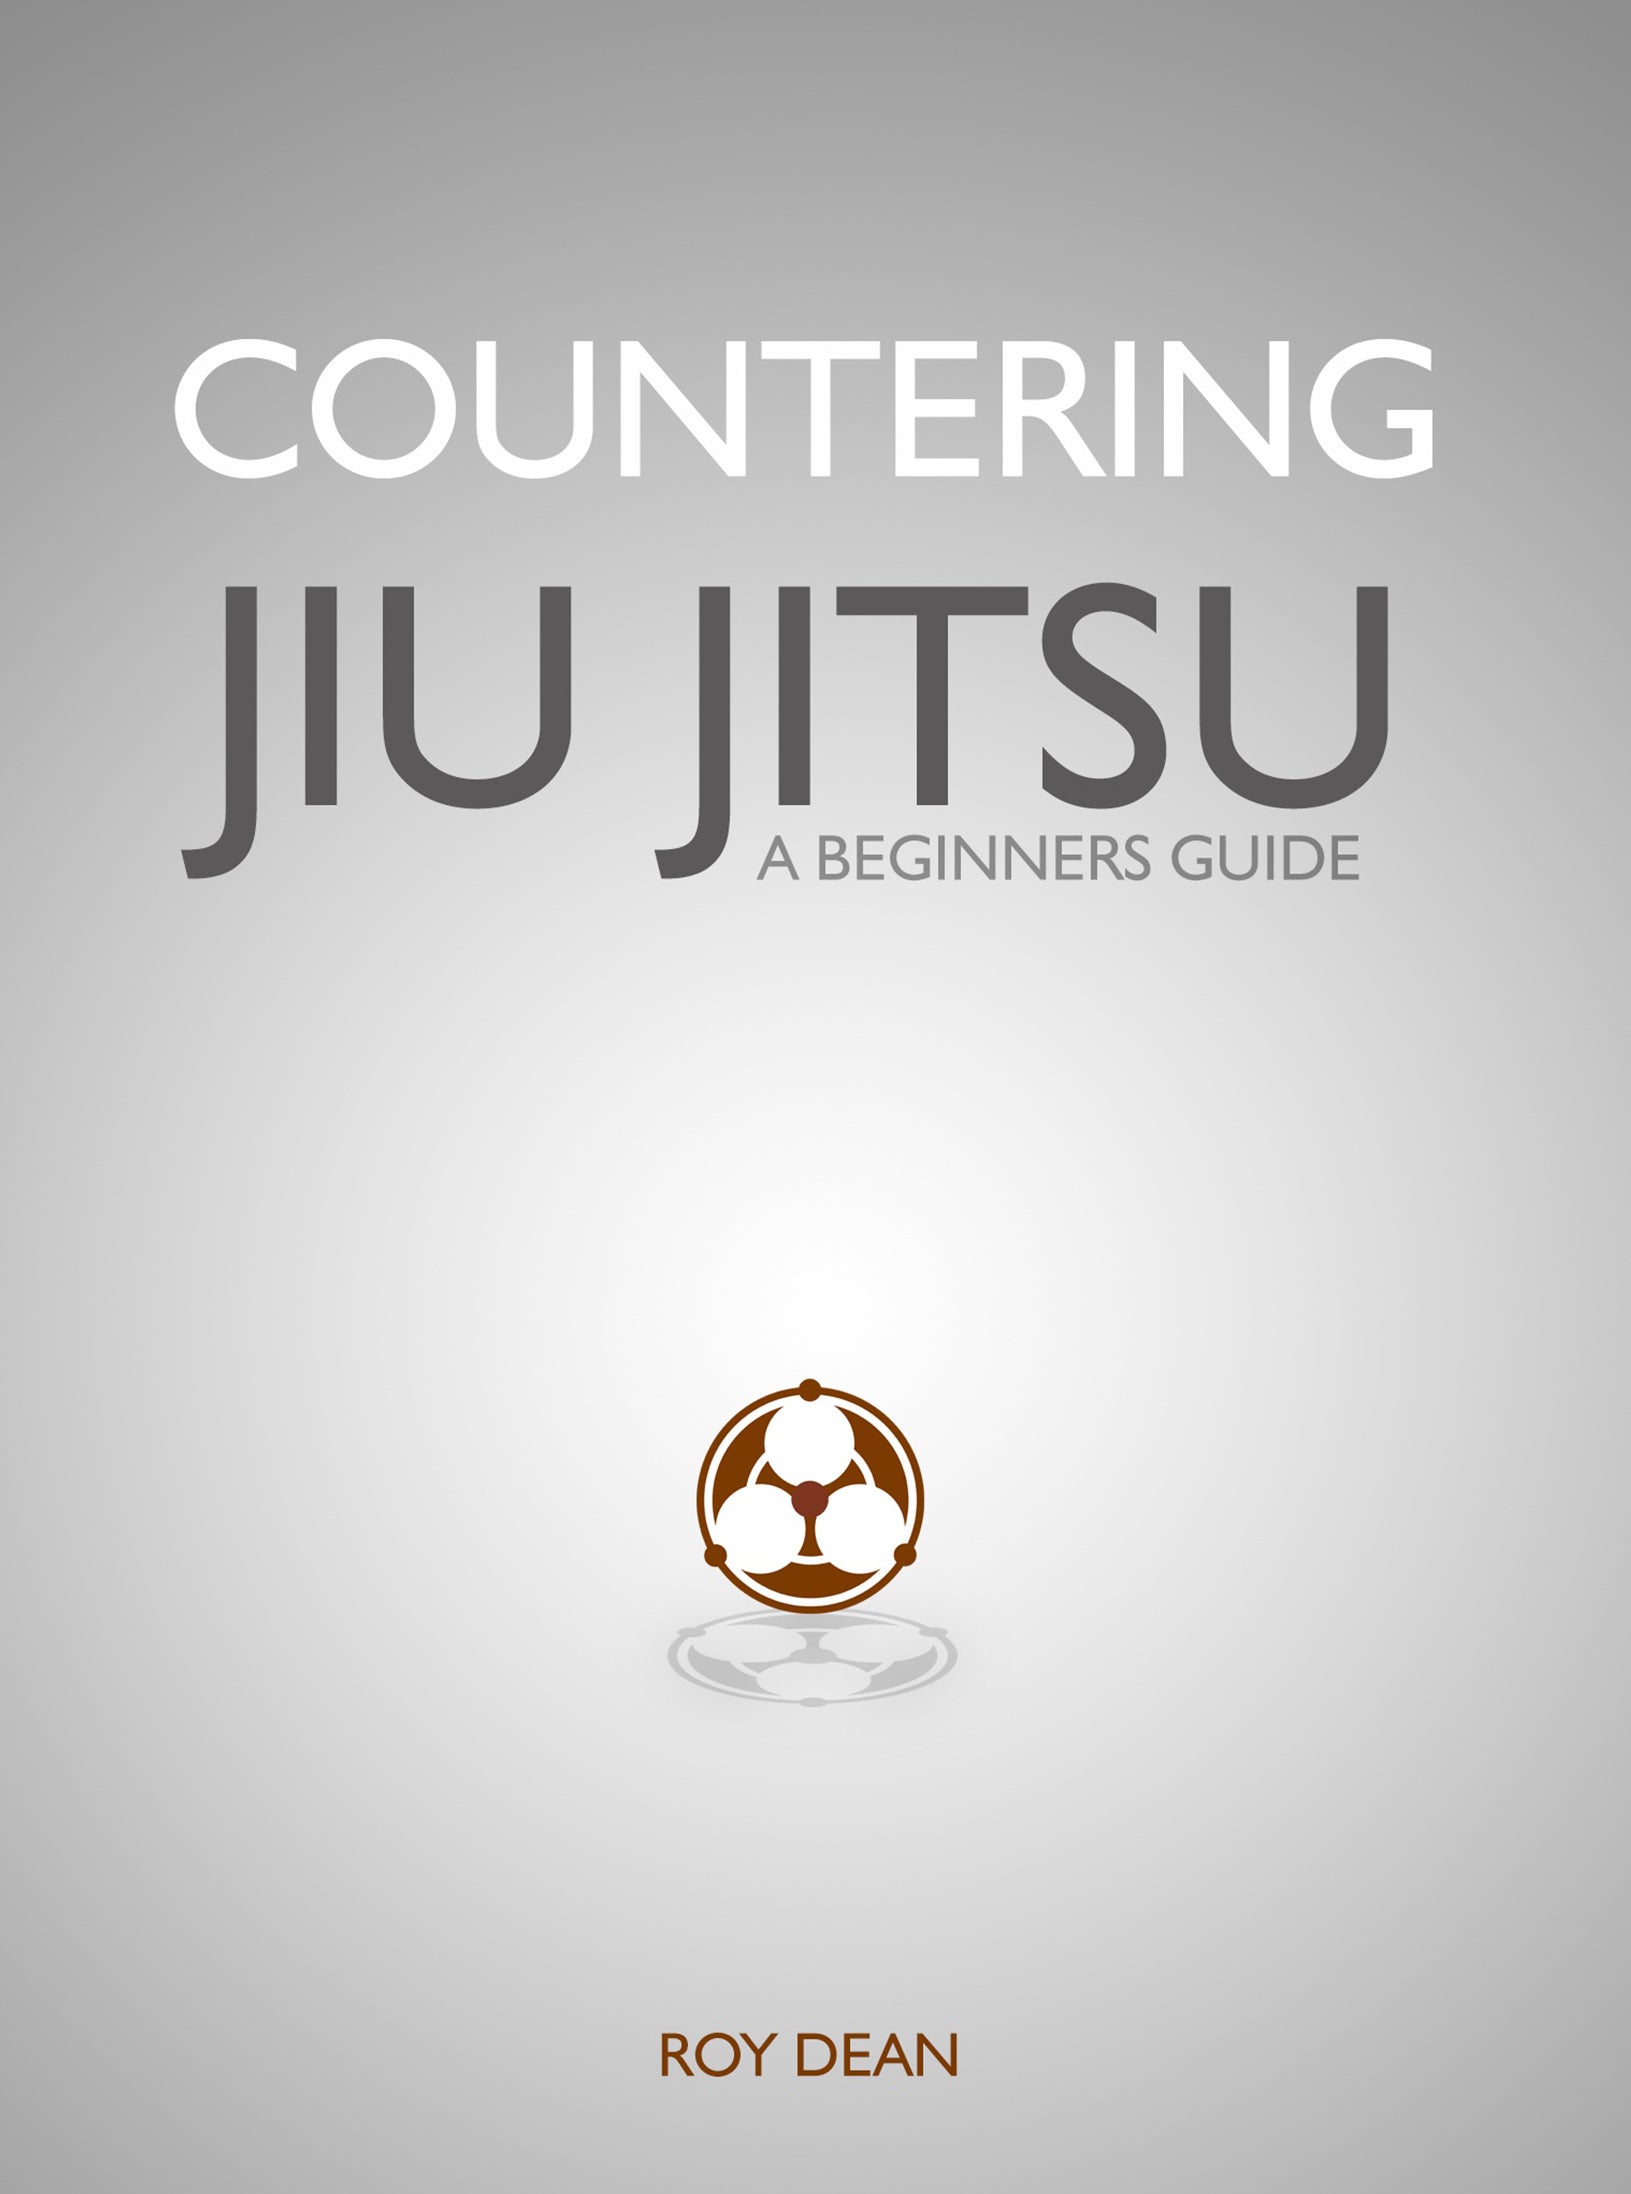 Untangled: How To Disengage From Conflict by Knight & Jessup – BJJ Fanatics